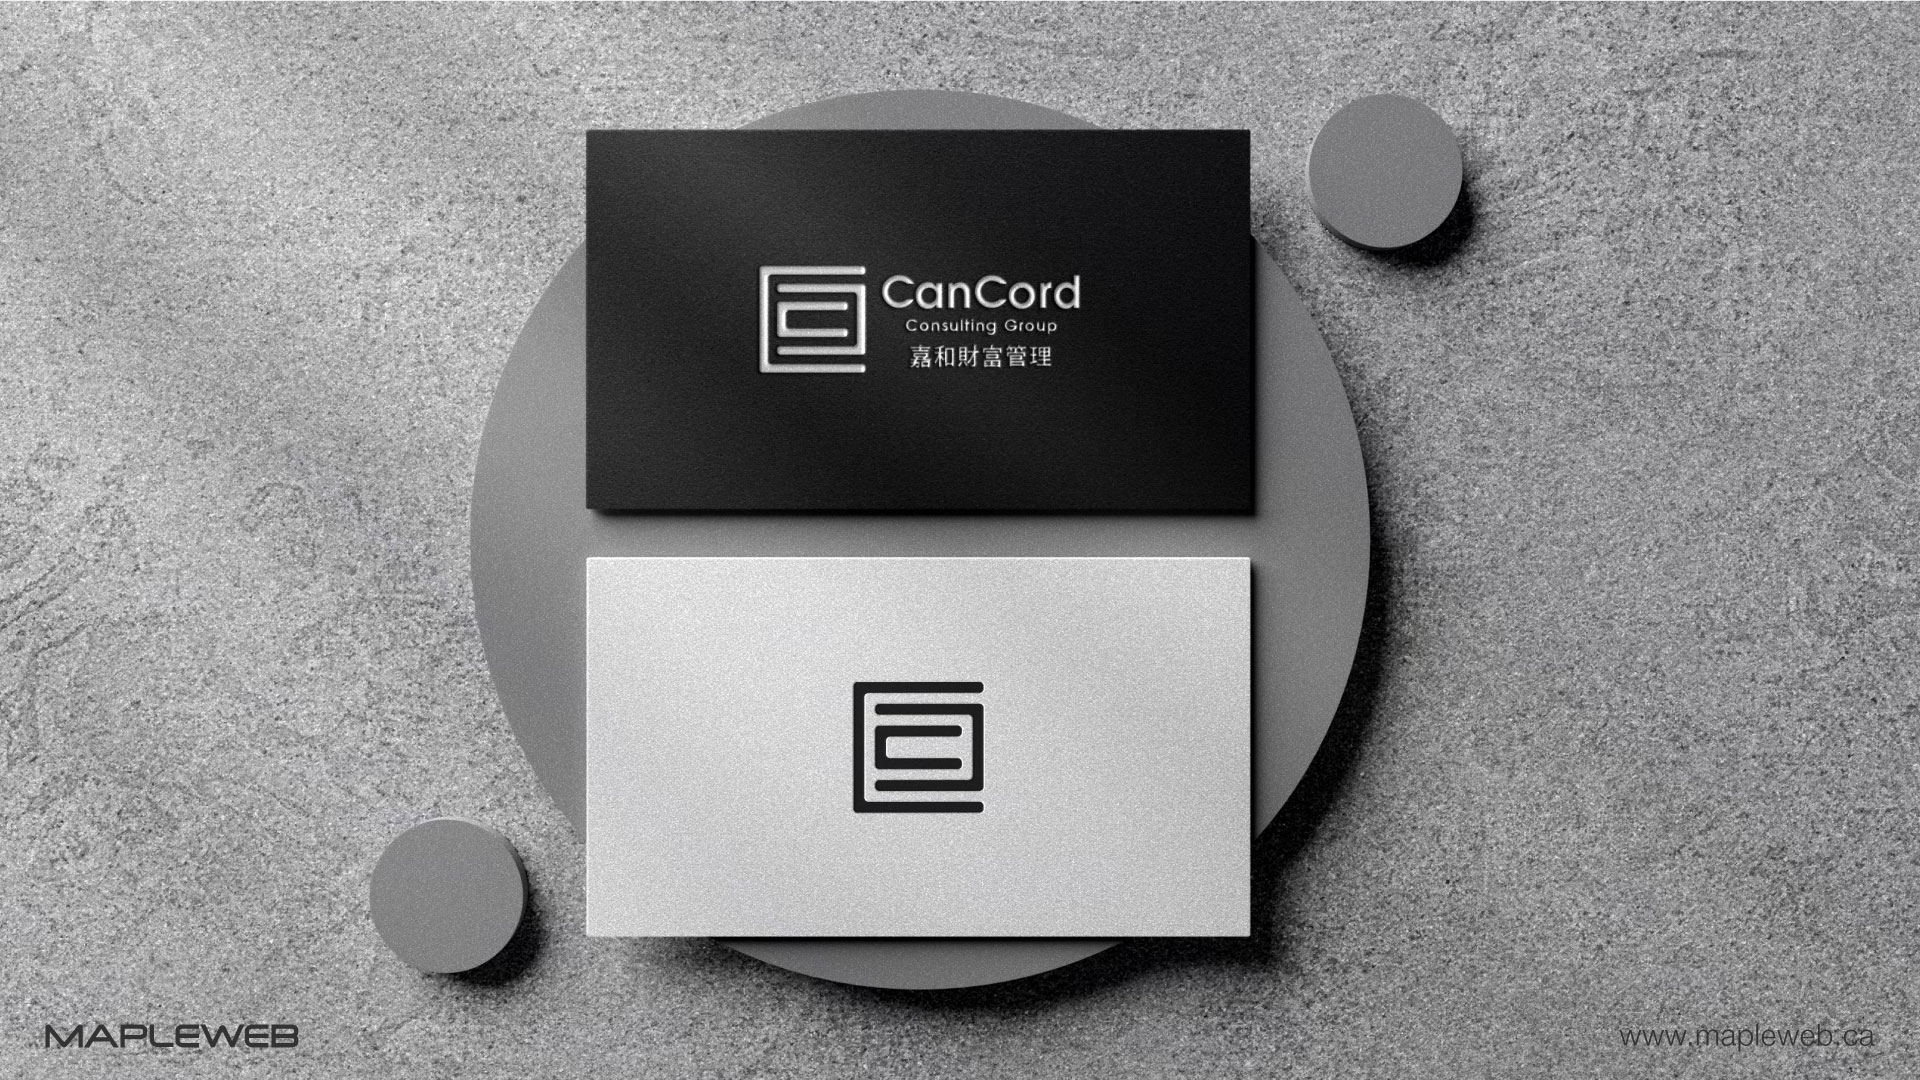 cancord-consulting-group-brand-logo-design-by-mapleweb-vancouver-canada-business-card-mock